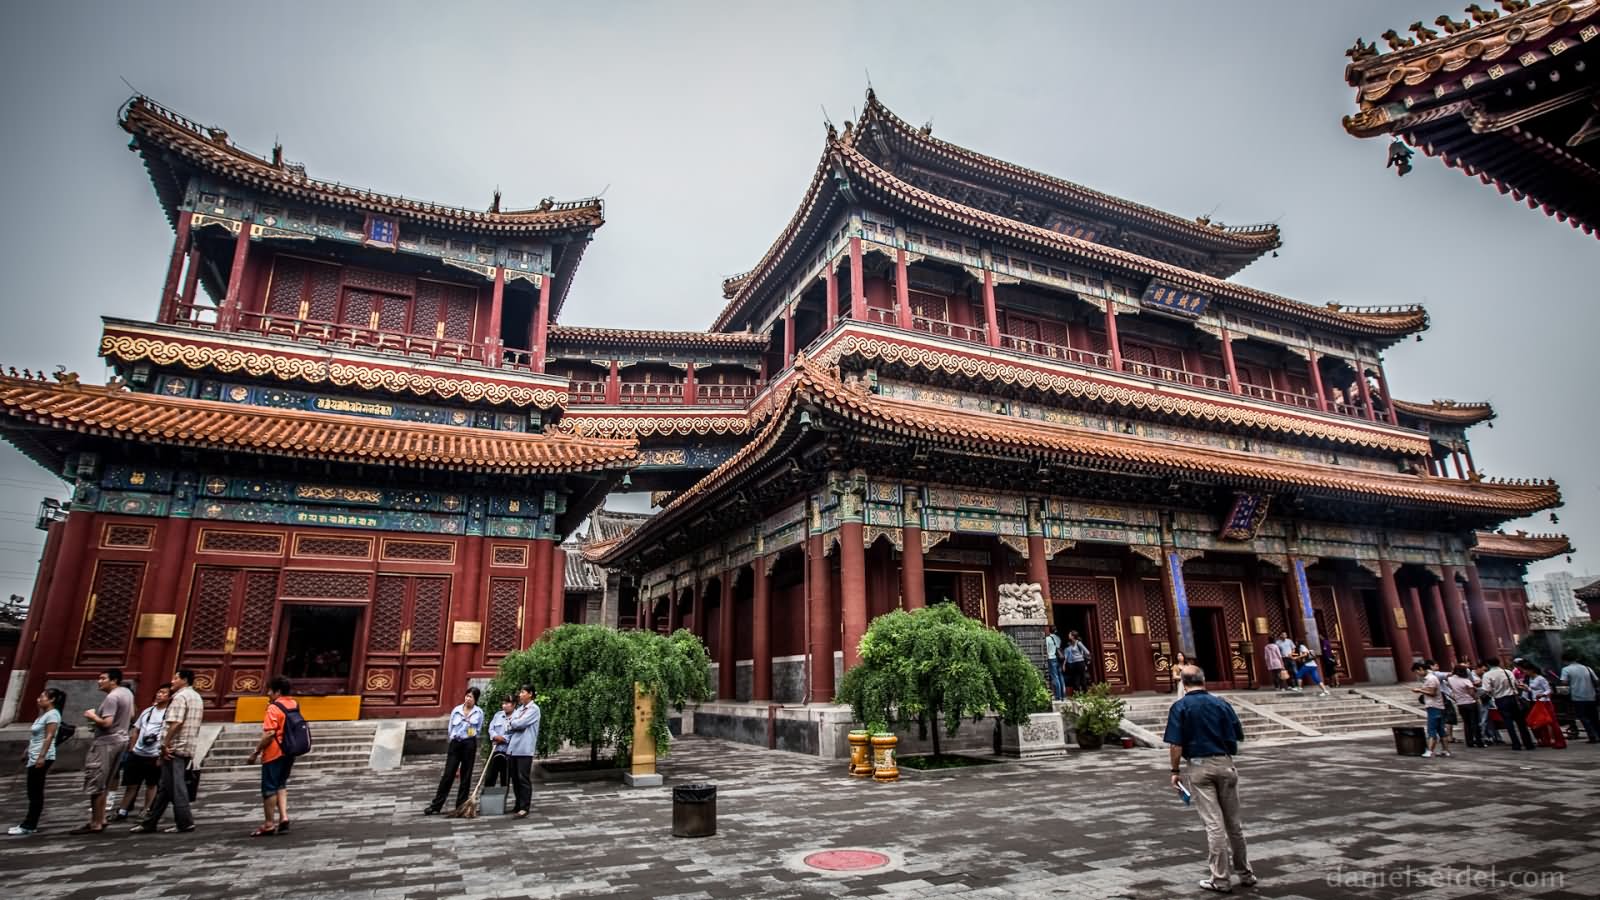 The Jade Buddha Temple is a Buddhist temple located in Shanghai, China